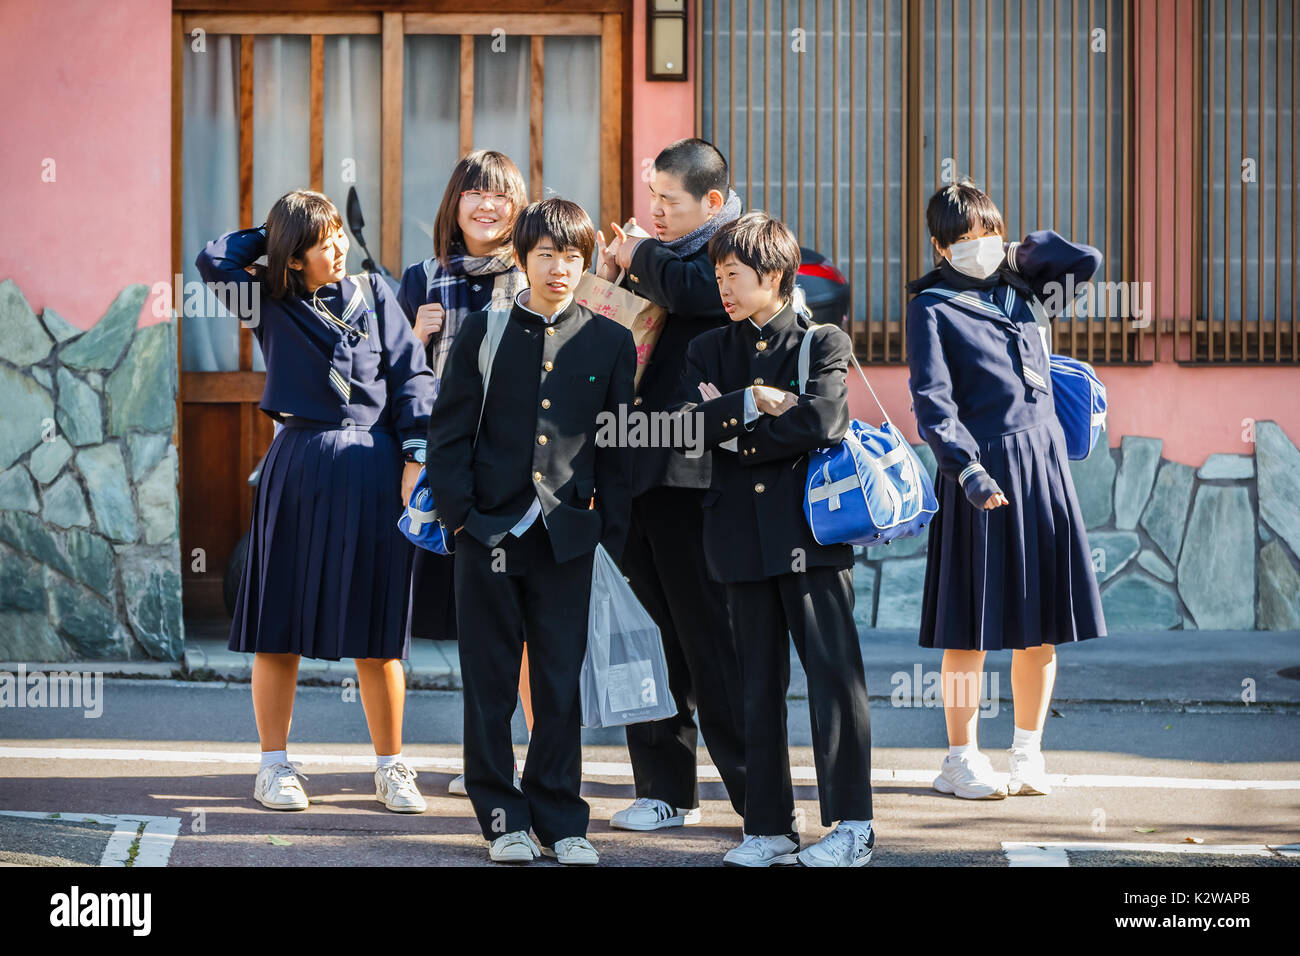 KYOTO, JAPAN - NOVEMBER 20: Japanese Students in Kyoto, Japan on November 20, 2013. Unidentified group of Japanese students are on the way to school Stock Photo